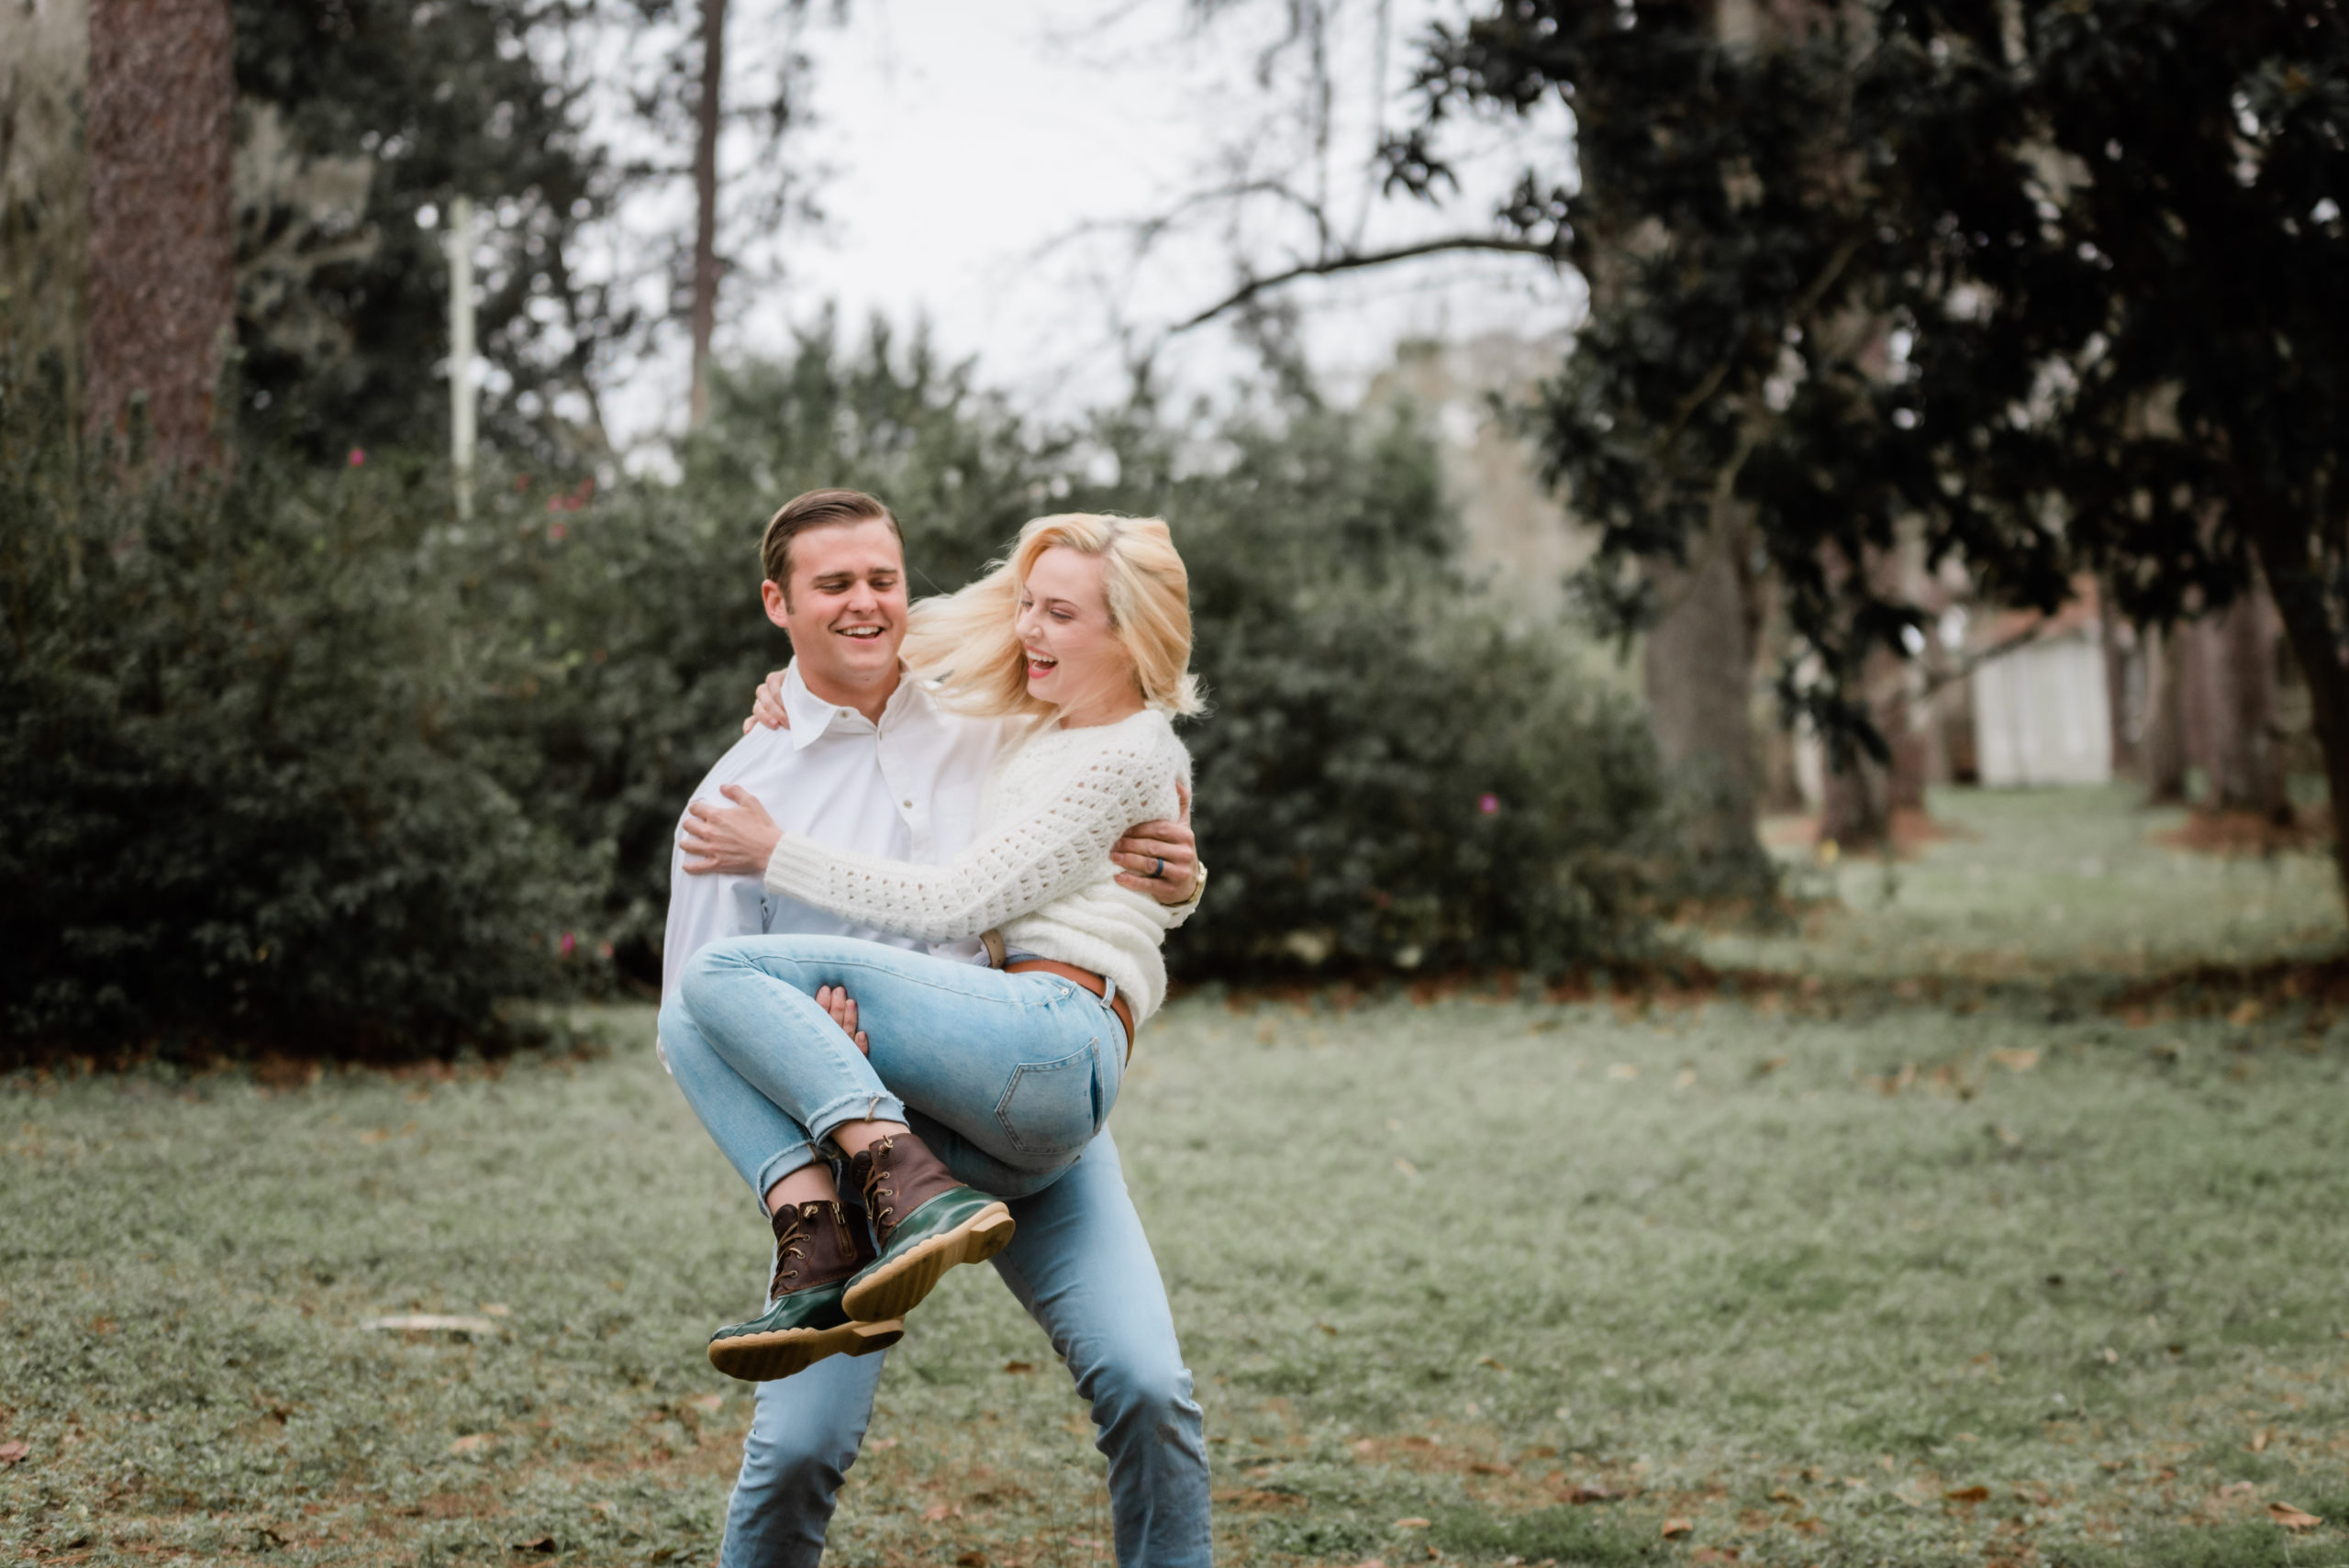 couples engagement photos at heritage park and gardens in live oak Florida by Black tie and co